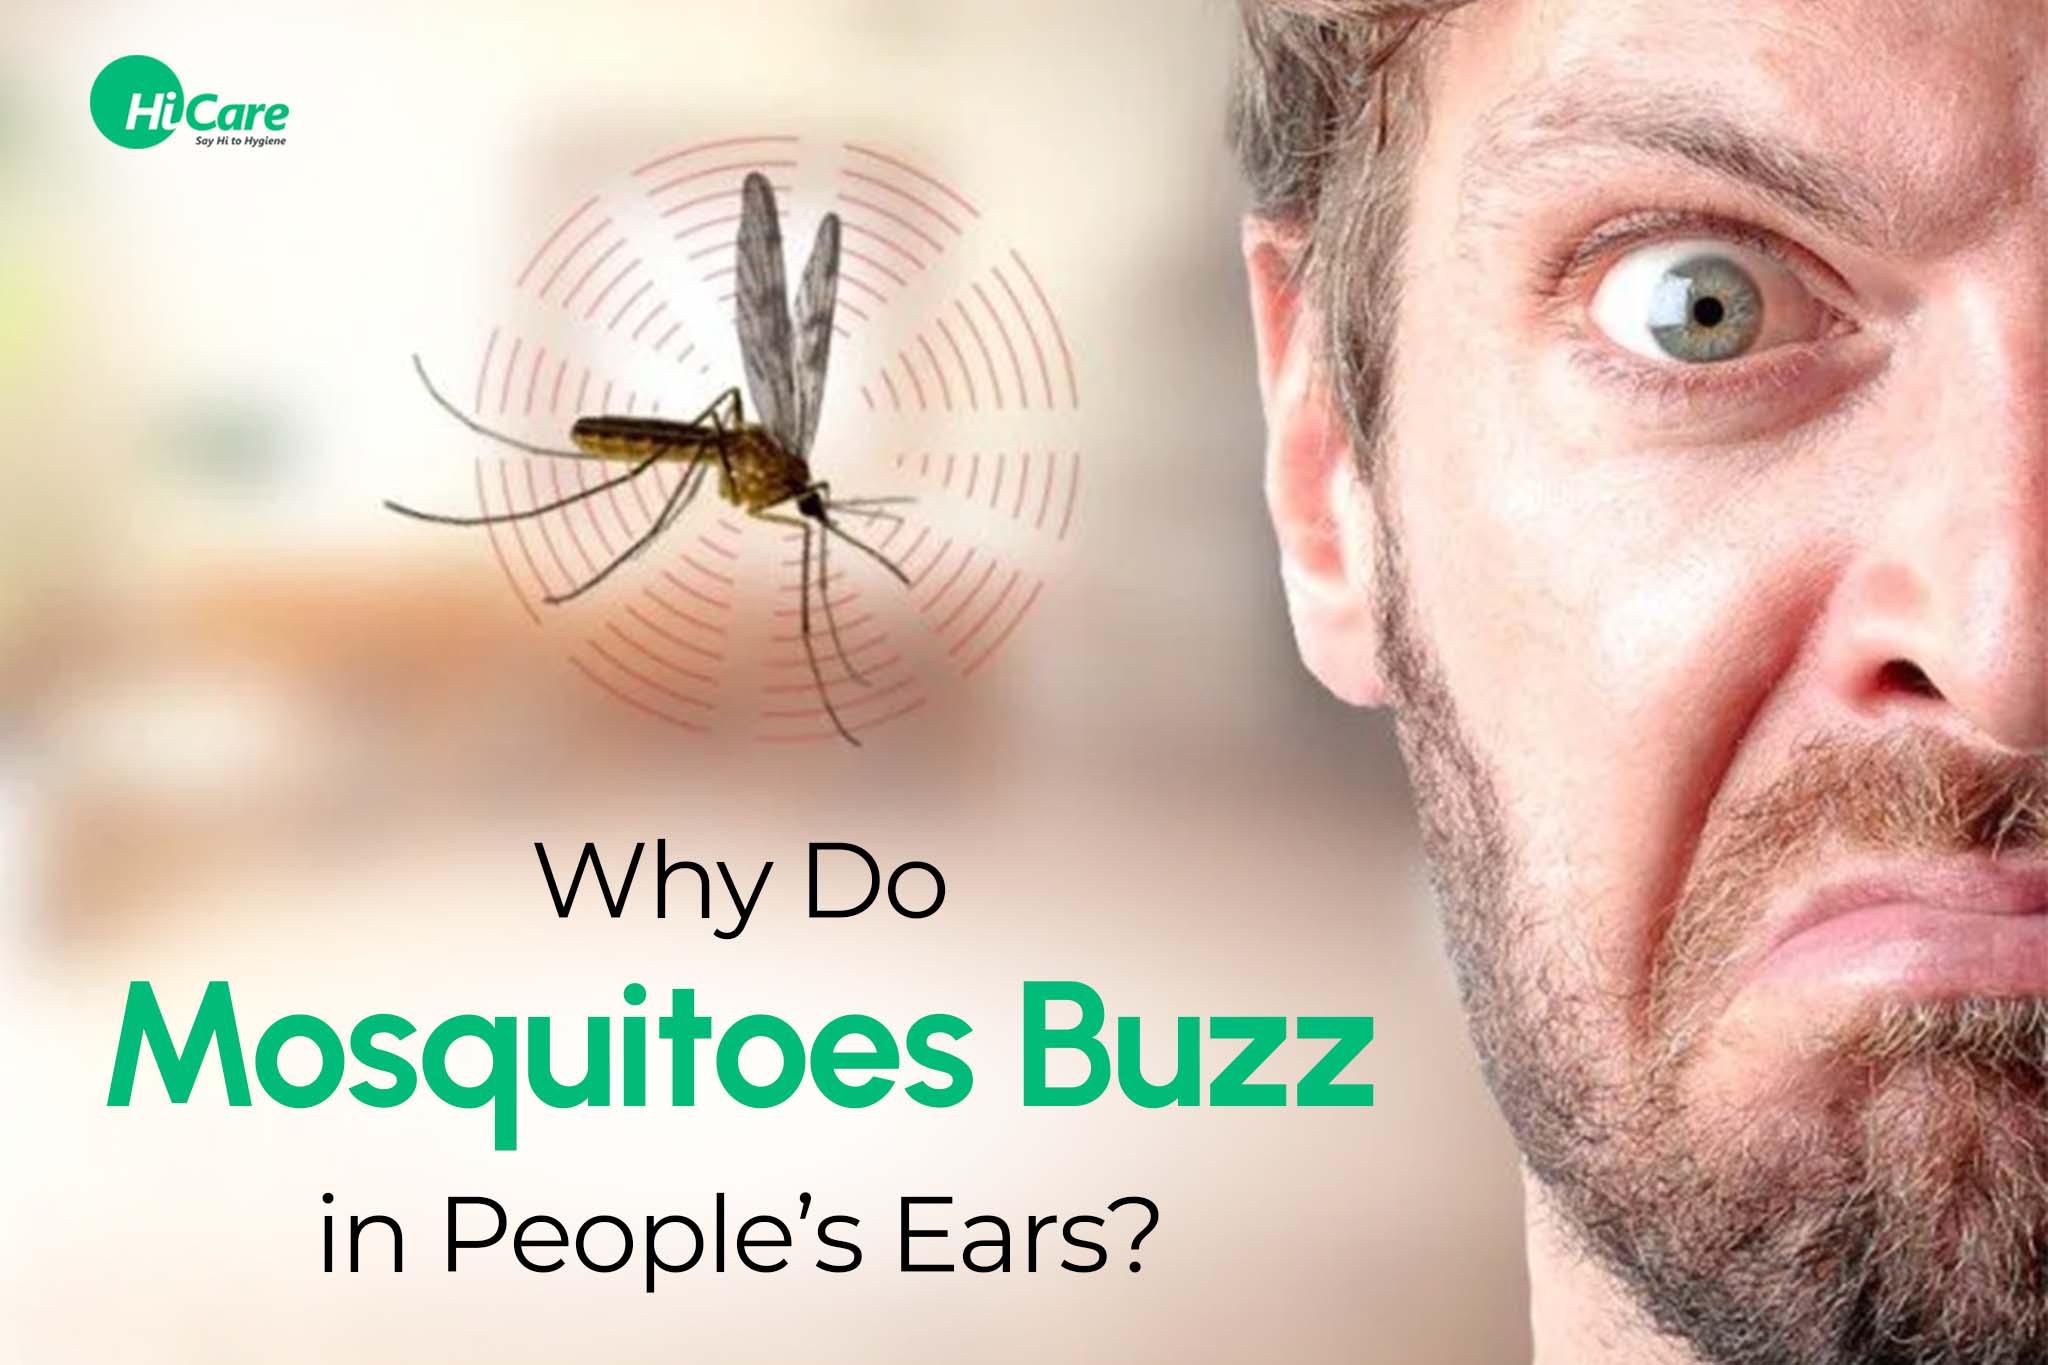 Why Do Mosquitoes Buzz in People’s Ears?